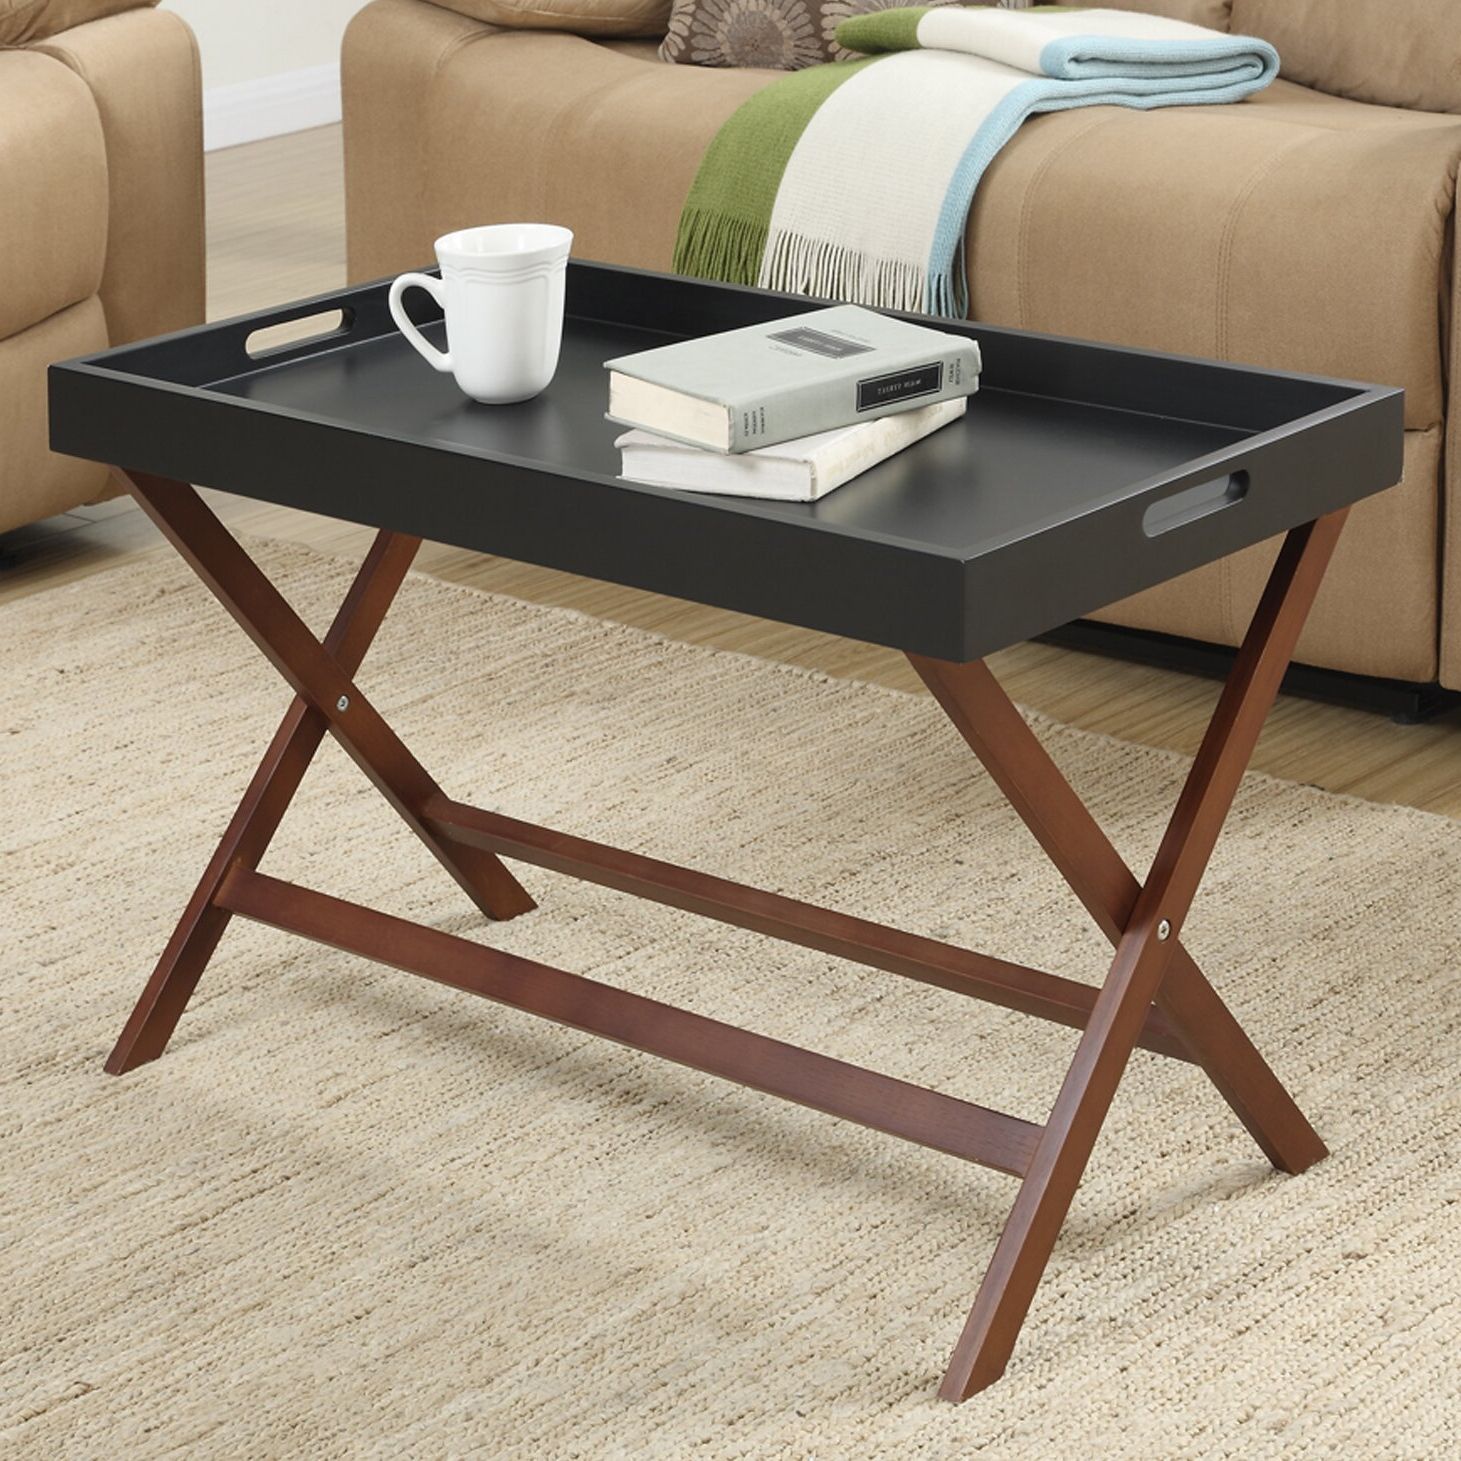 Coffee Tables With Trays For Current Andover Mills Lockheart Coffee Table With Removable Tray & Reviews (View 10 of 15)